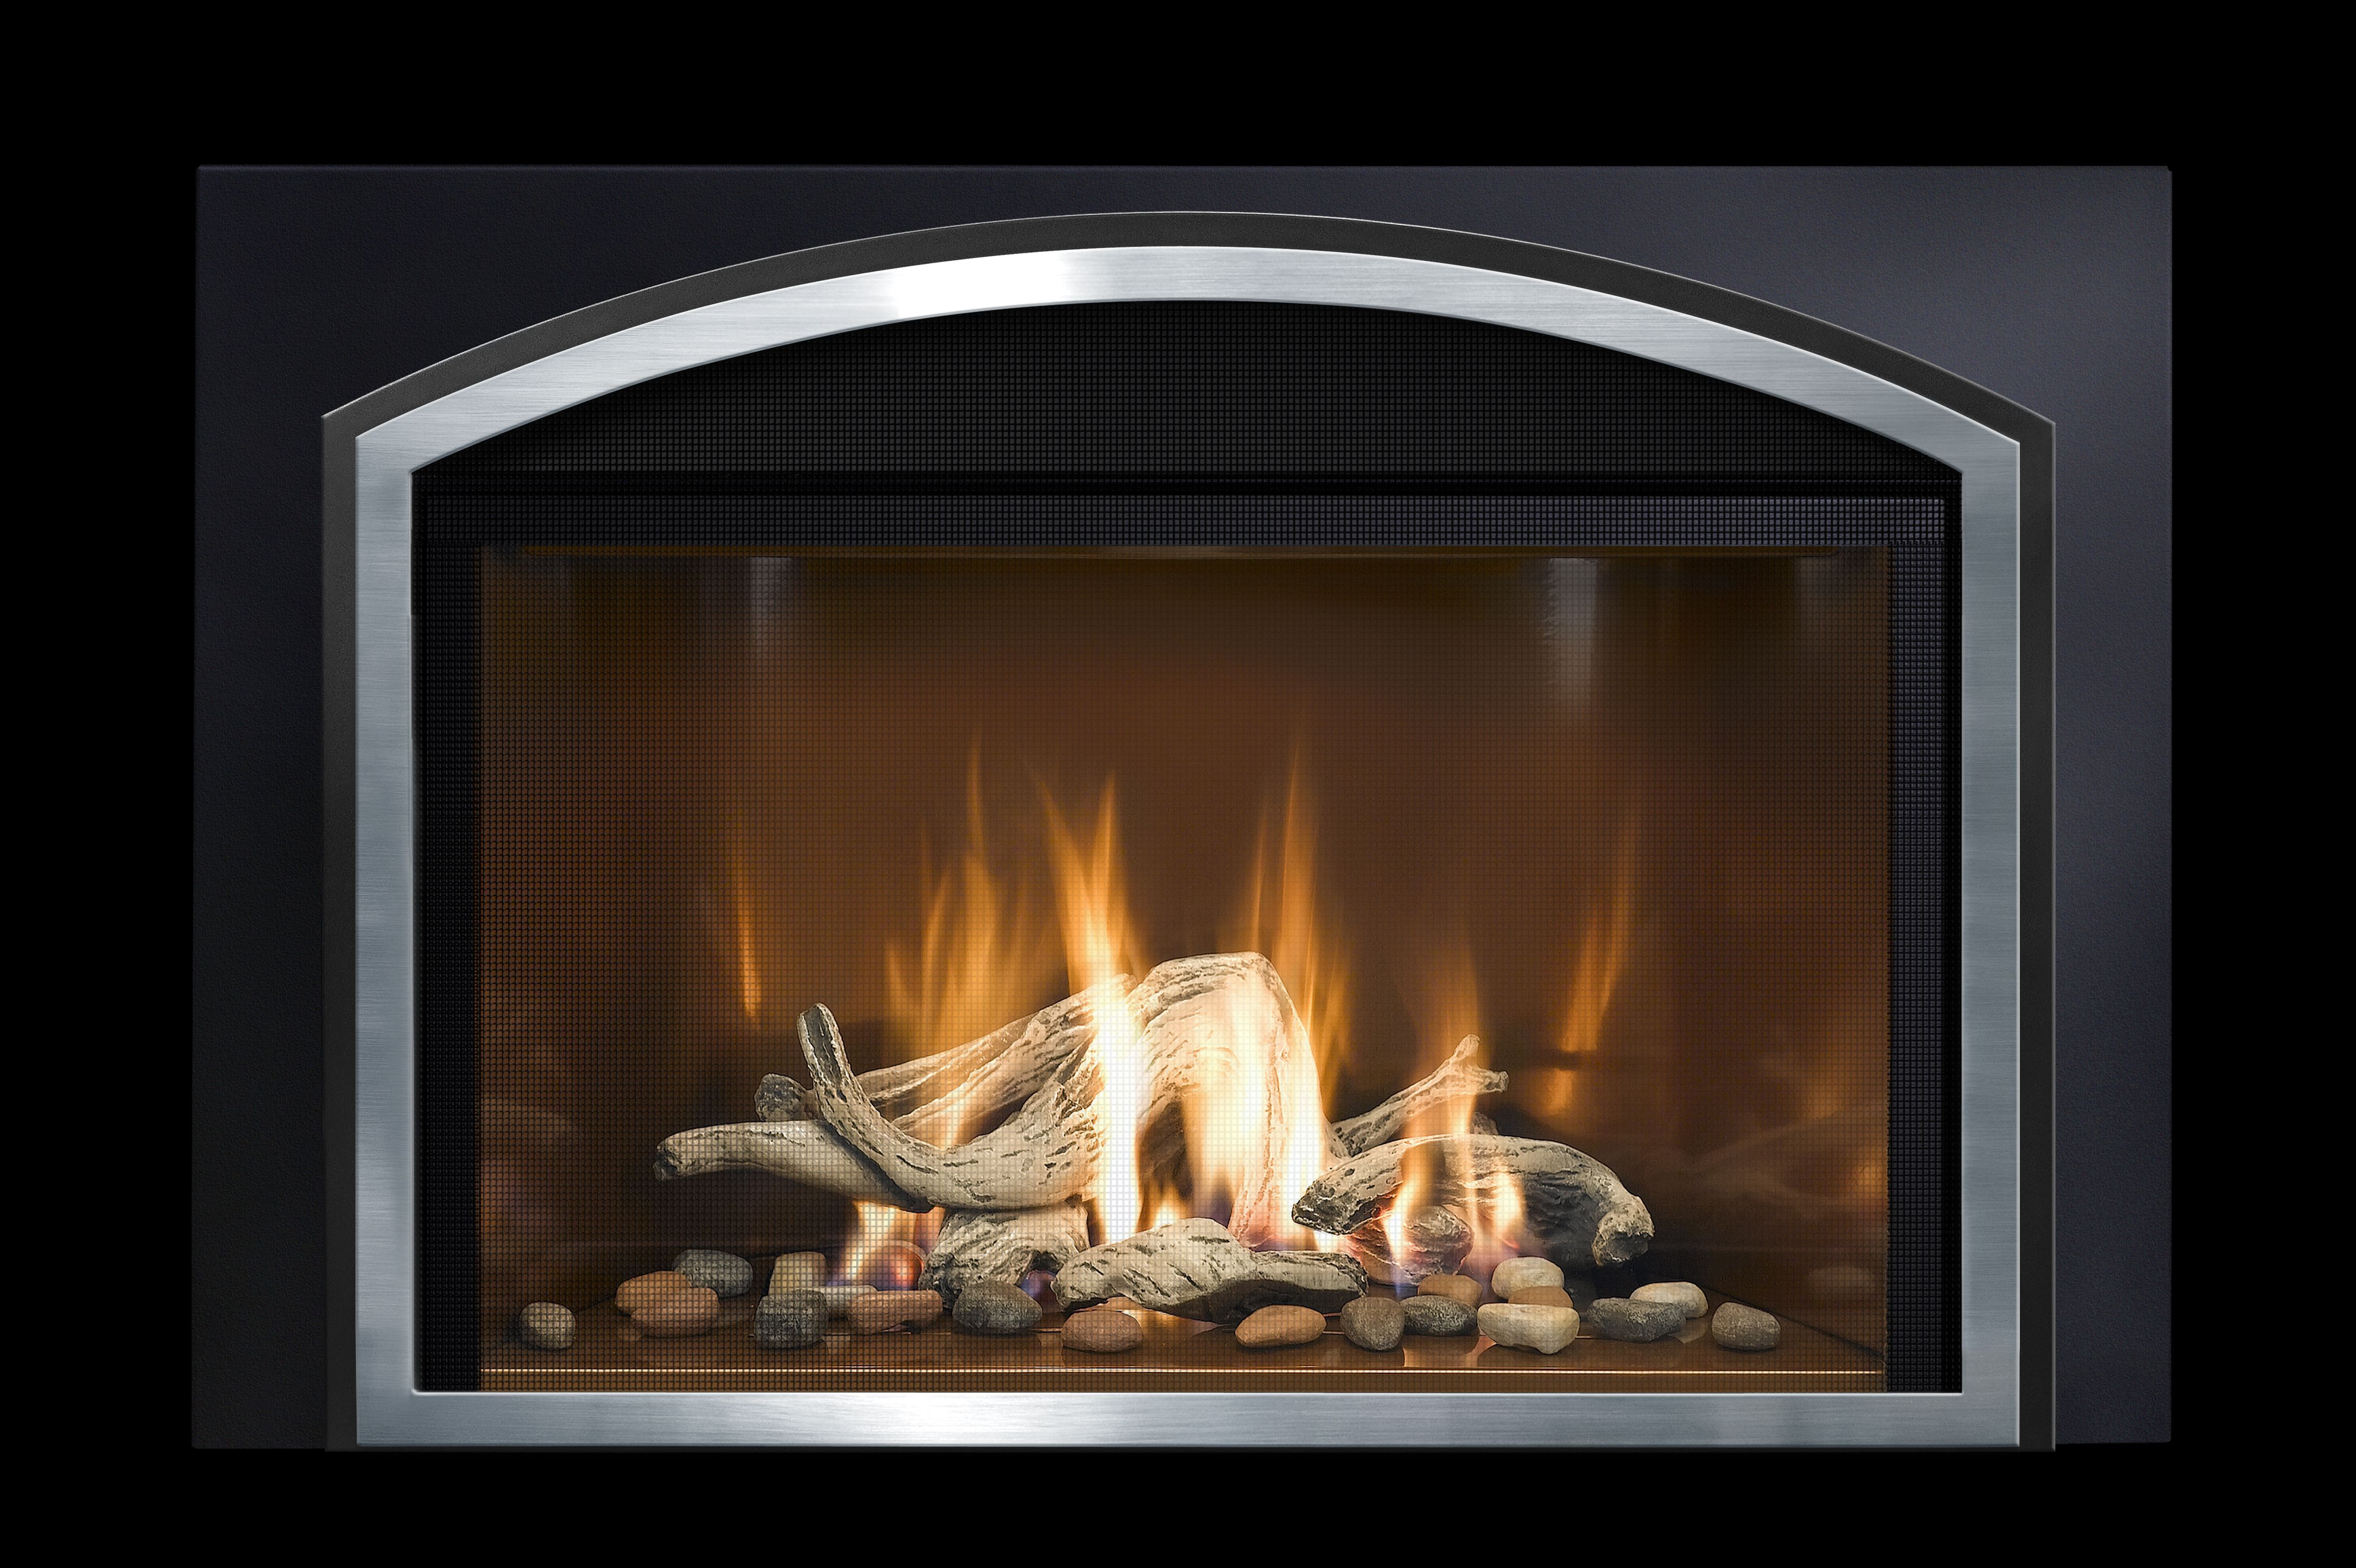 Procom Gas Fireplace Inspirational the Inherent Elegance Of This Arched Design is Available In